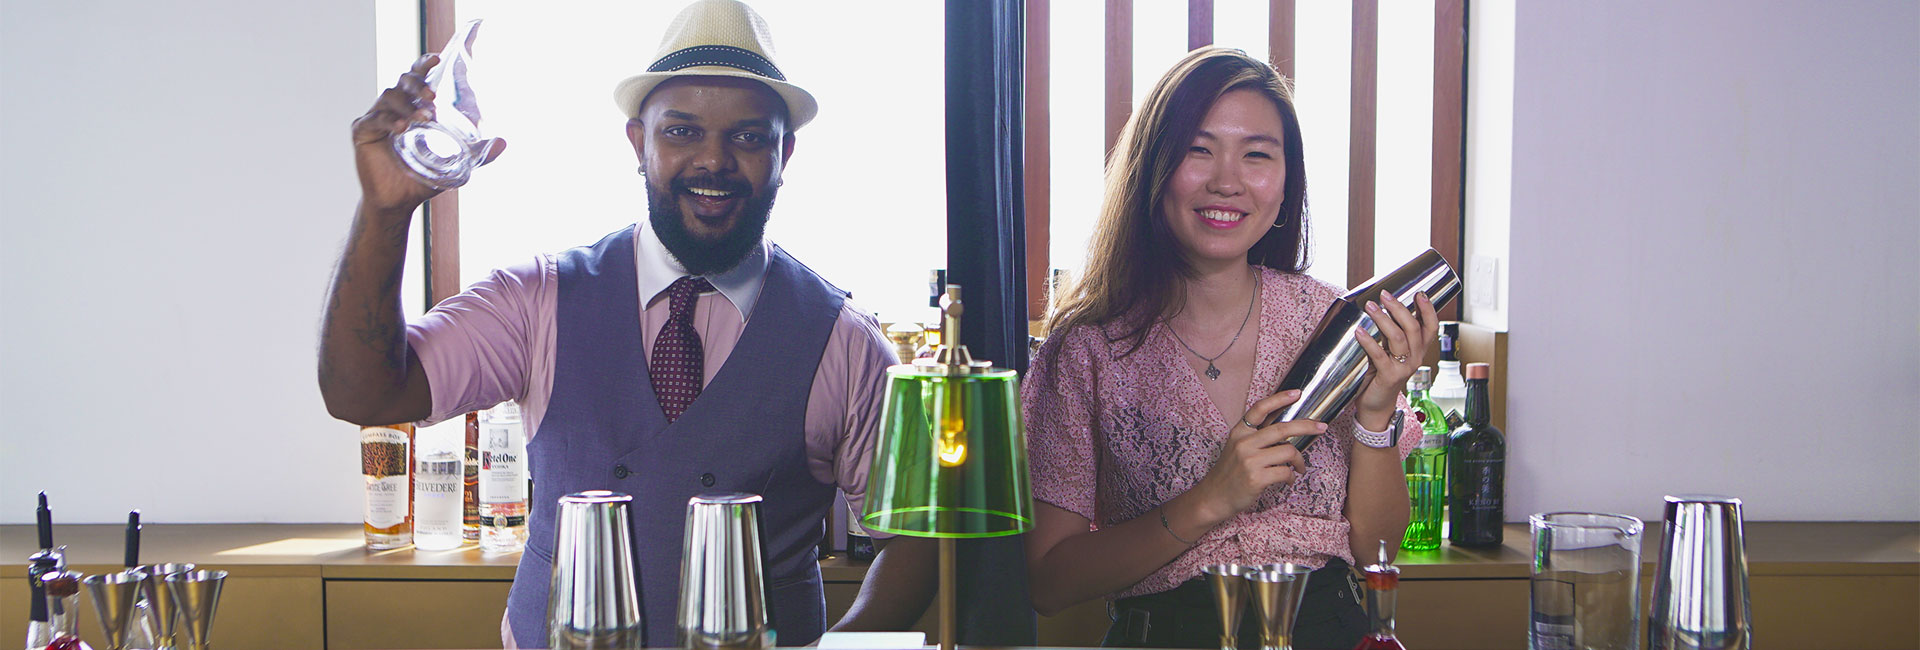 Side by Side Bartending: Making Malaysian-inspired cocktails at Pacific Standard Bar